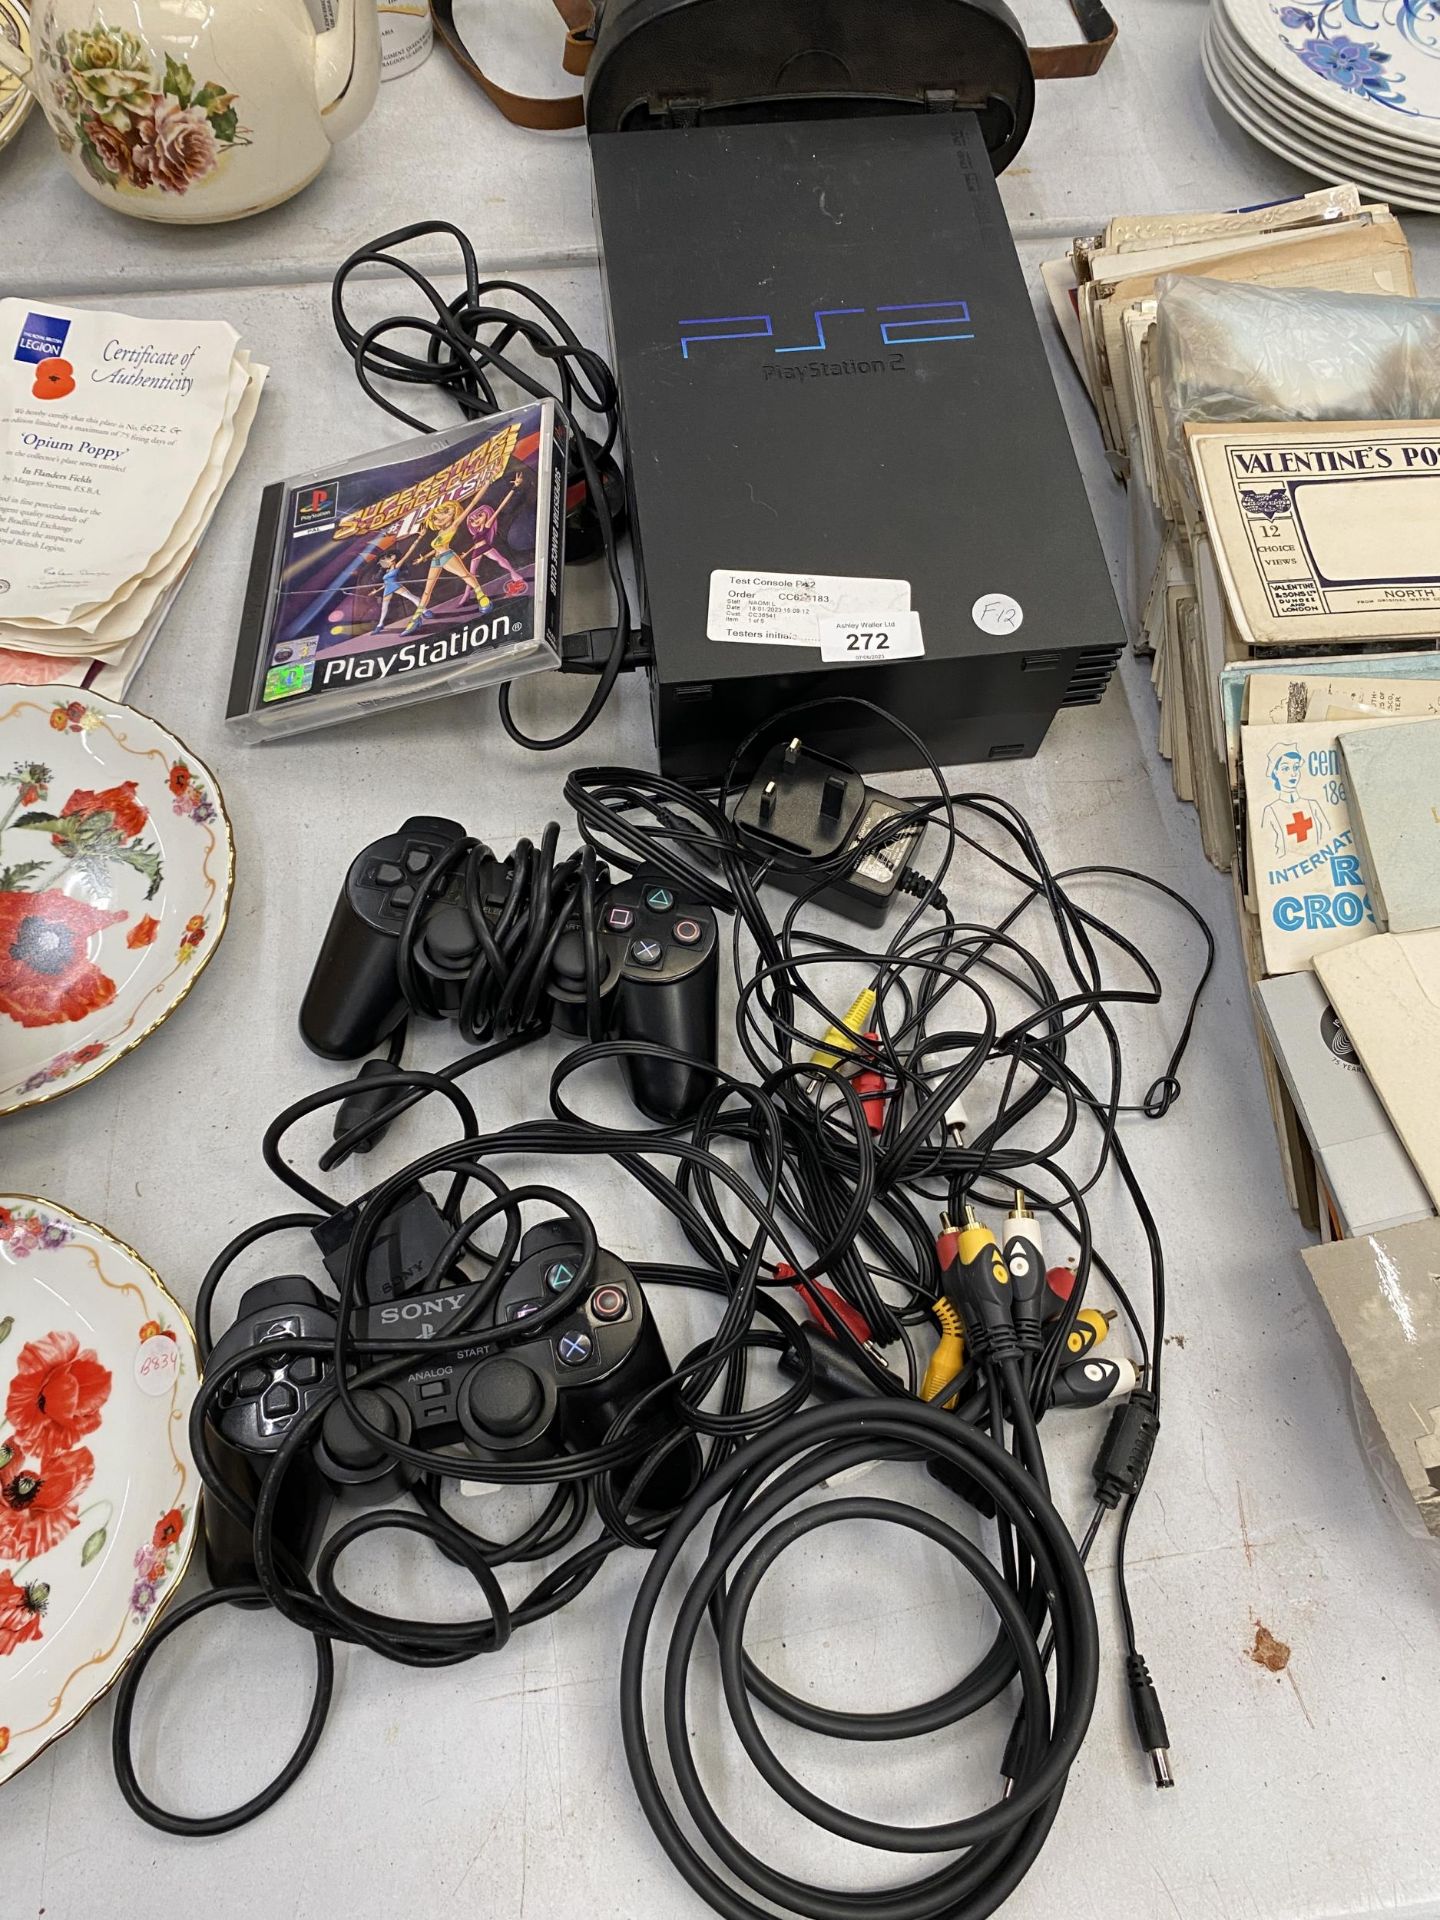 A PS2 WITH TWO CONTROLLERS, CABLE AND A SUPERSTAR DANCE CLUB GAME